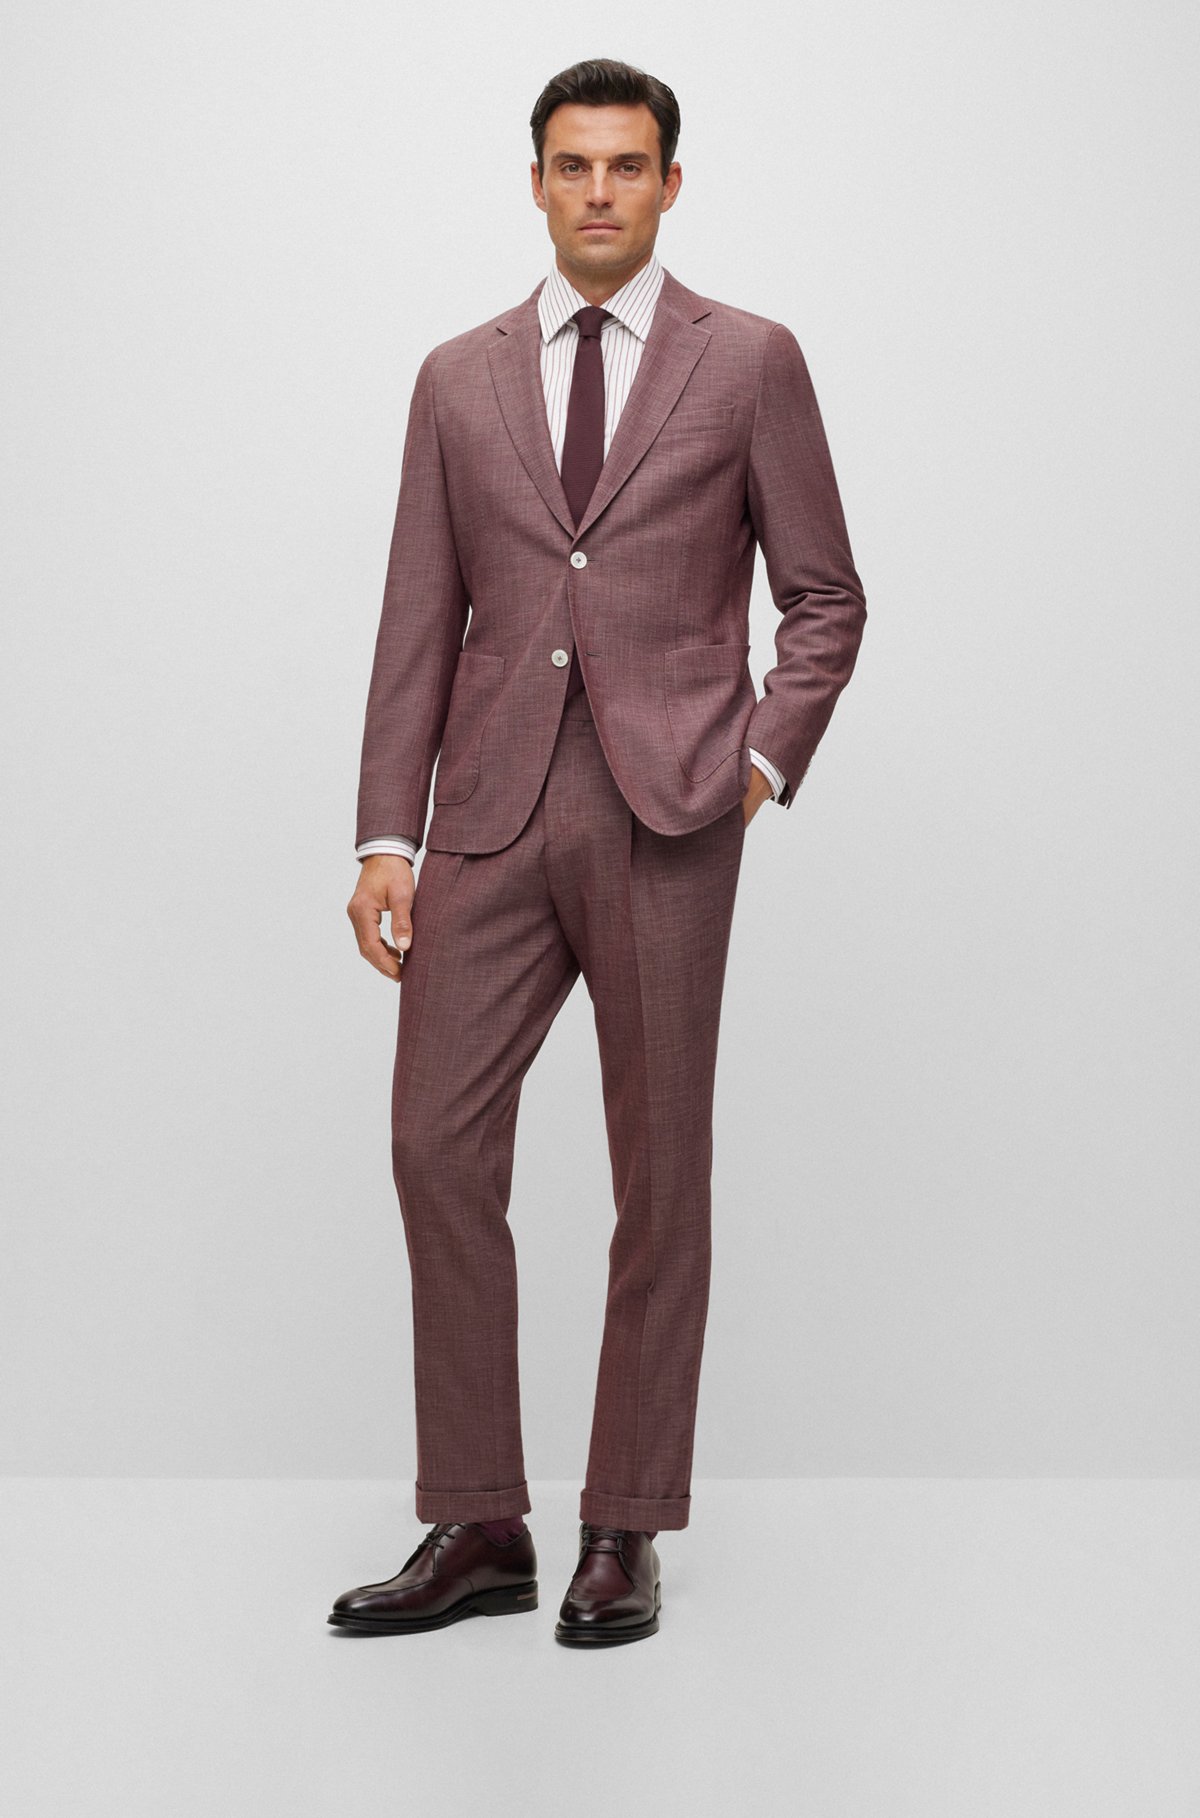 BOSS - Slim-fit suit in a patterned blend